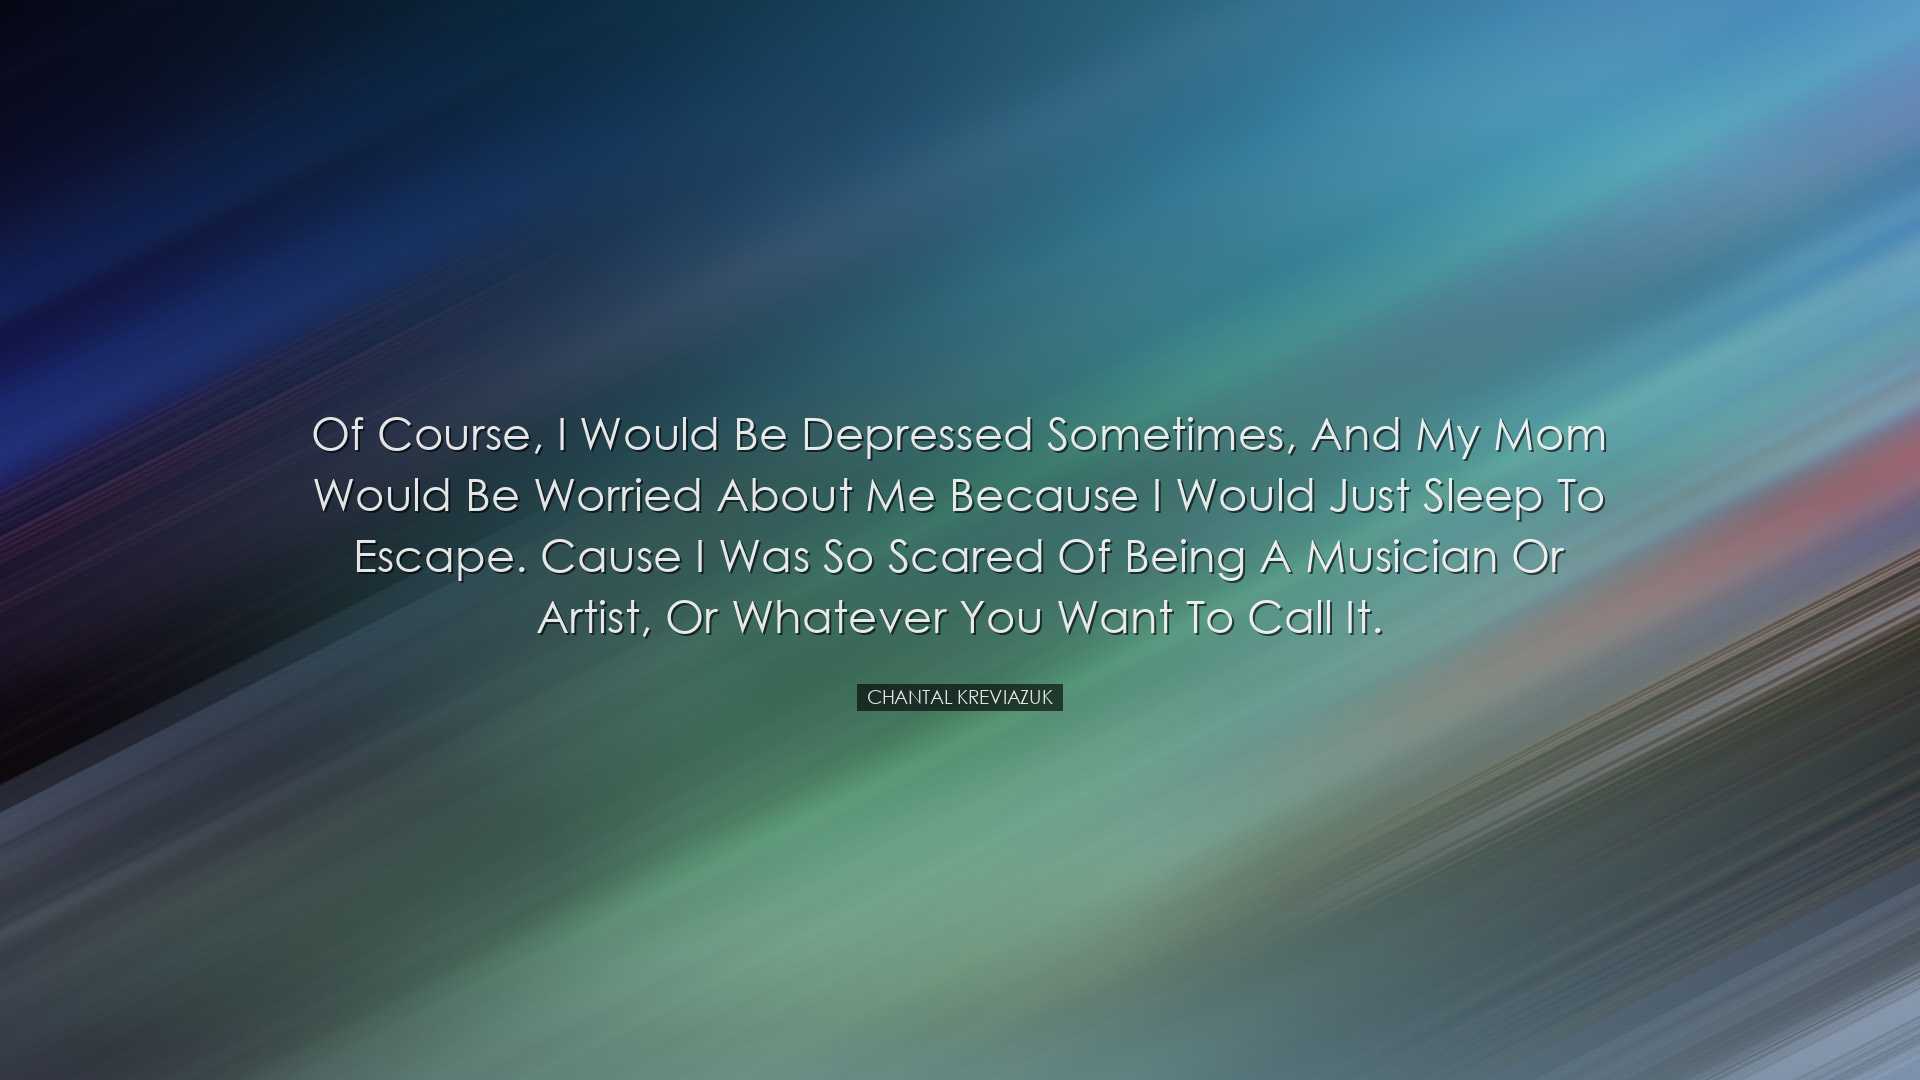 Of course, I would be depressed sometimes, and my Mom would be wor